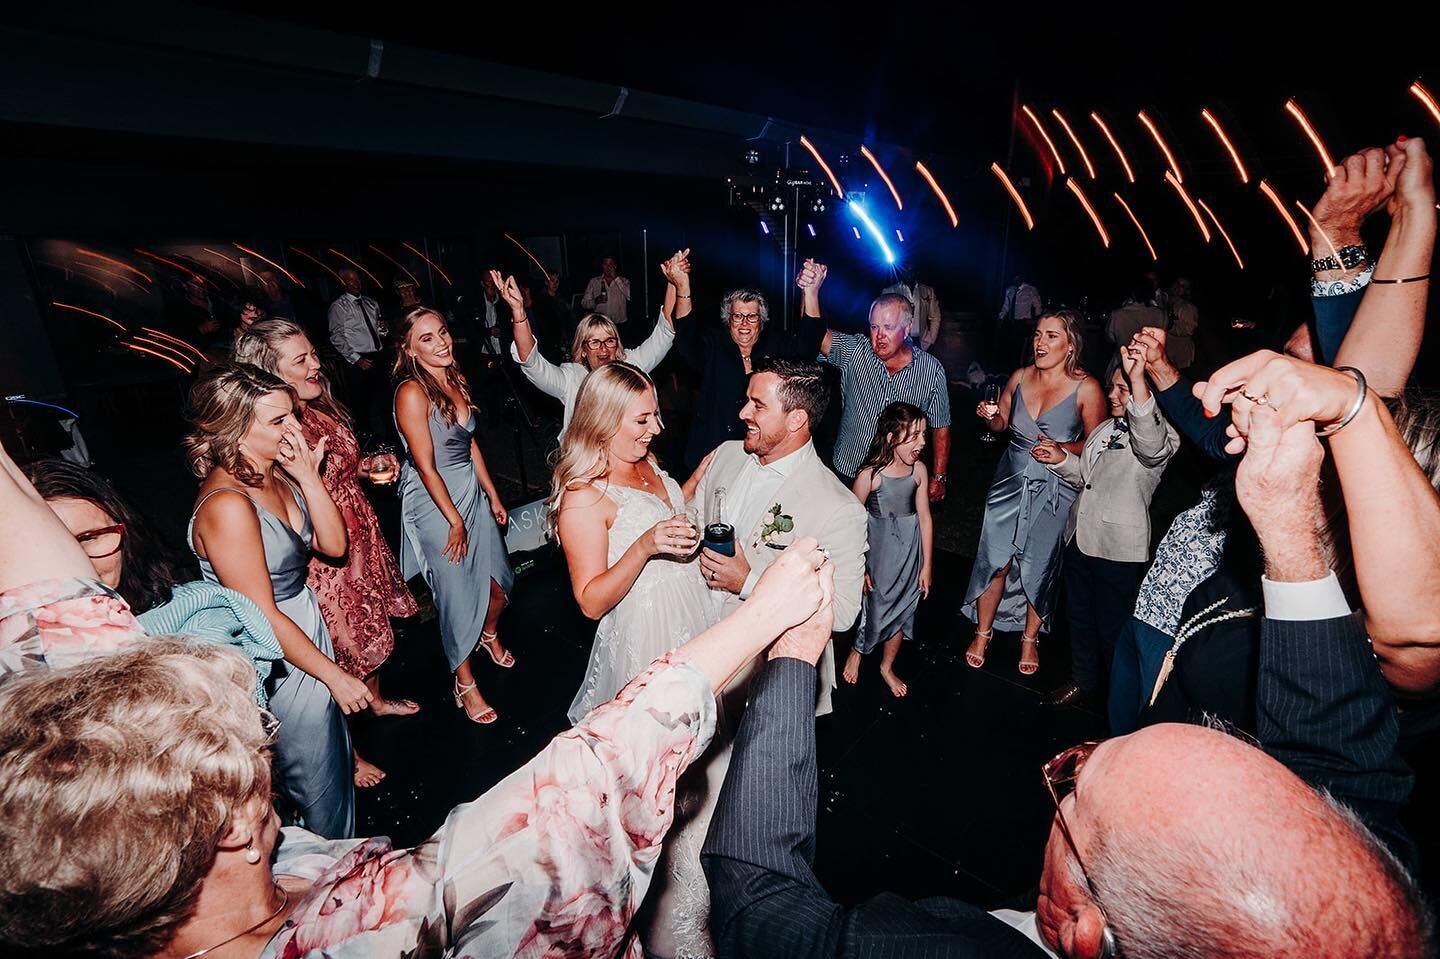 It&rsquo;s not long now until wedding season starts again at @tanahmarah 💍

We&rsquo;re wondering, what songs get you on the dancefloor? 🕺🏻

Throwback to @south.sound.events getting the dancefloor pumping at Mary-Anne &amp; John&rsquo;s wedding 💃